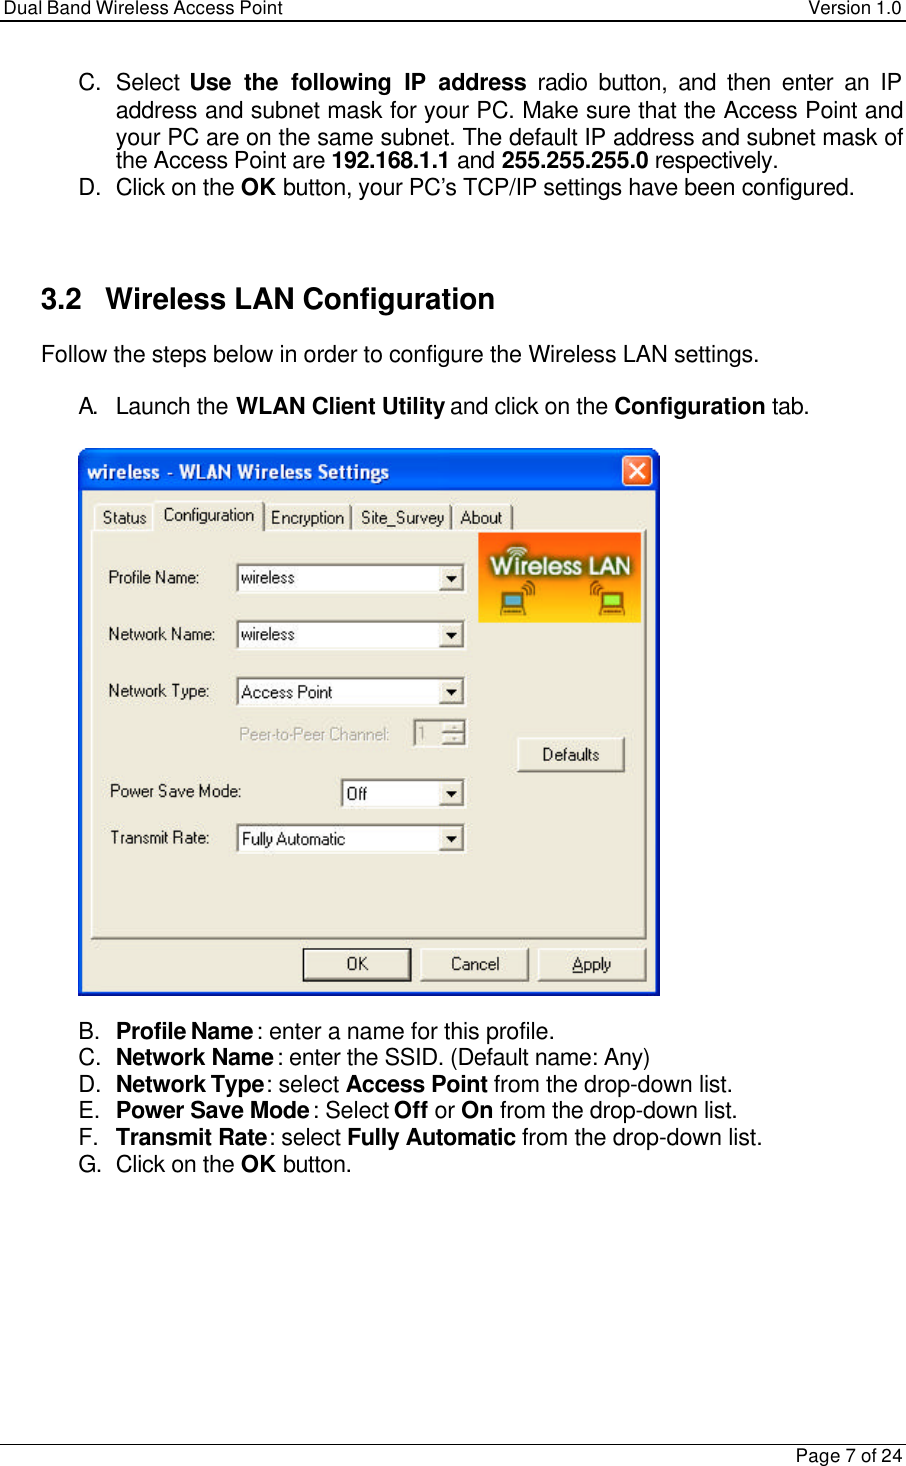 Dual Band Wireless Access Point Version 1.0Page 7 of 24C. Select Use the following IP address radio button, and then enter an IPaddress and subnet mask for your PC. Make sure that the Access Point andyour PC are on the same subnet. The default IP address and subnet mask ofthe Access Point are 192.168.1.1 and 255.255.255.0 respectively.D. Click on the OK button, your PC’s TCP/IP settings have been configured.3.2   Wireless LAN ConfigurationFollow the steps below in order to configure the Wireless LAN settings.A. Launch the WLAN Client Utility and click on the Configuration tab.B. Profile Name: enter a name for this profile.C. Network Name: enter the SSID. (Default name: Any)D. Network Type: select Access Point from the drop-down list.E. Power Save Mode: Select Off or On from the drop-down list.F. Transmit Rate: select Fully Automatic from the drop-down list.G. Click on the OK button.